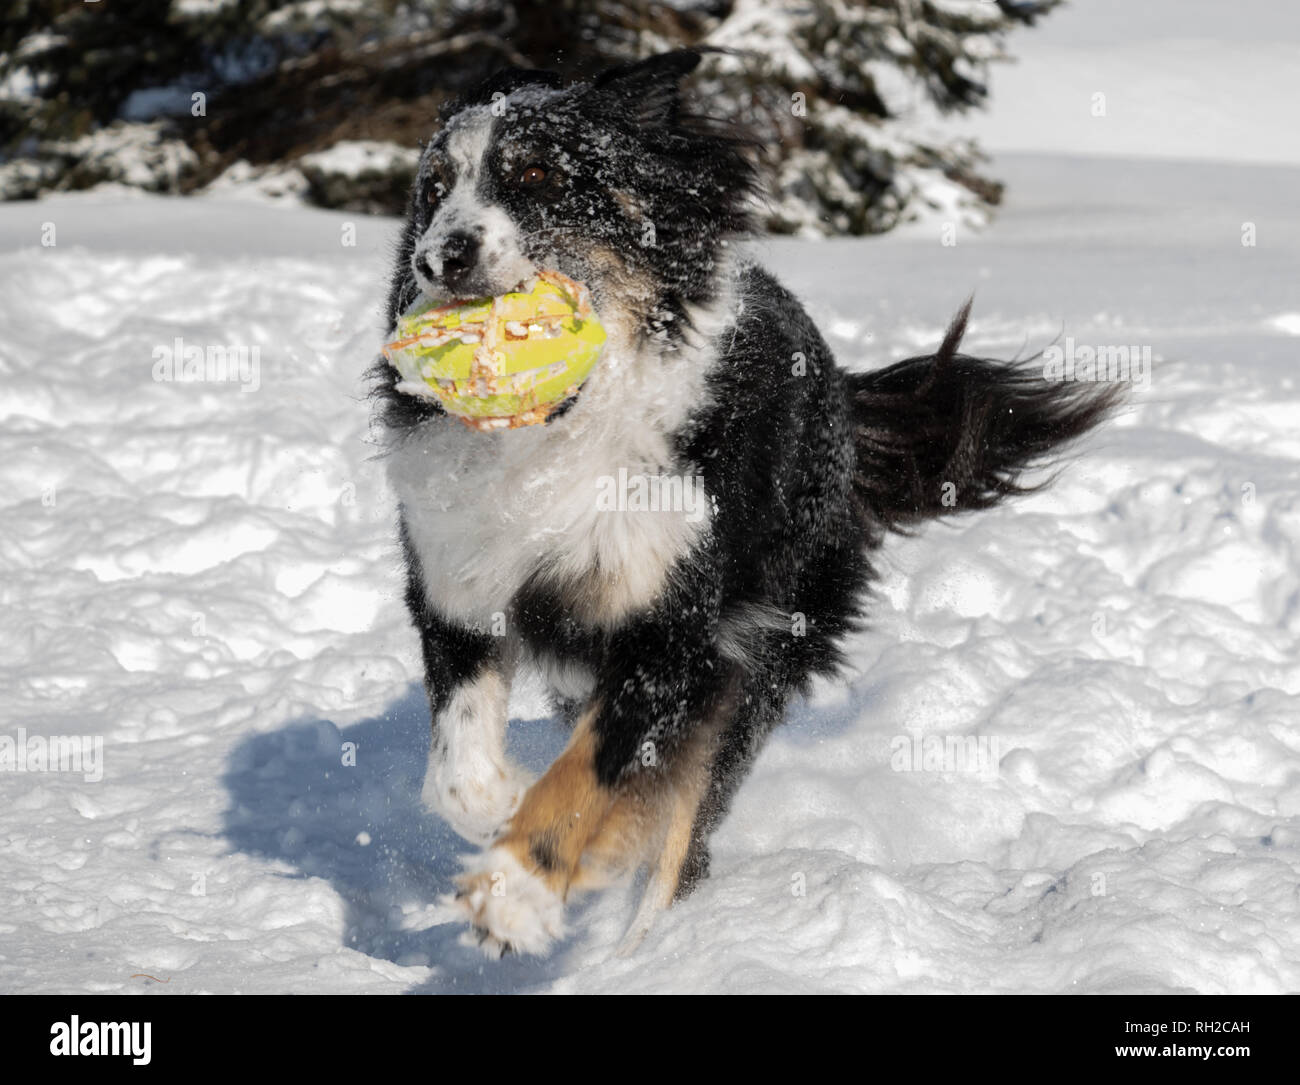 The dog is running through deep fluffy snow with his ball. Stock Photo